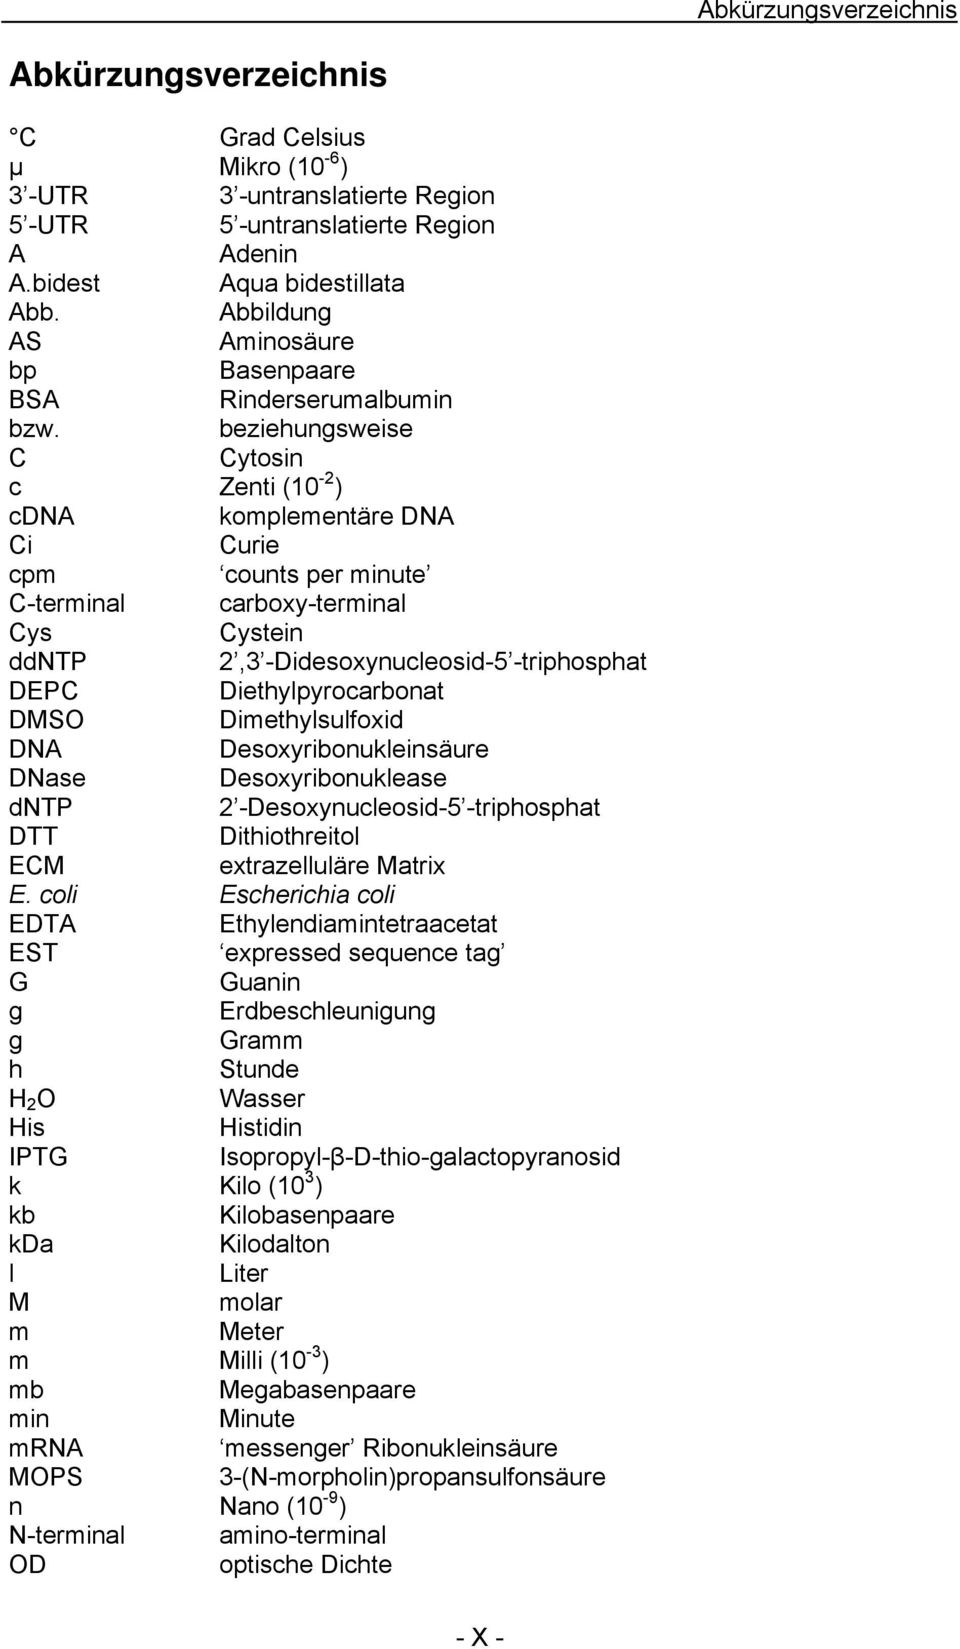 beziehungsweise C Cytosin c Zenti (10-2 ) cdna komplementäre DNA Ci Curie cpm counts per minute C-terminal carboxy-terminal Cys Cystein ddntp 2,3 -Didesoxynucleosid-5 -triphosphat DEPC